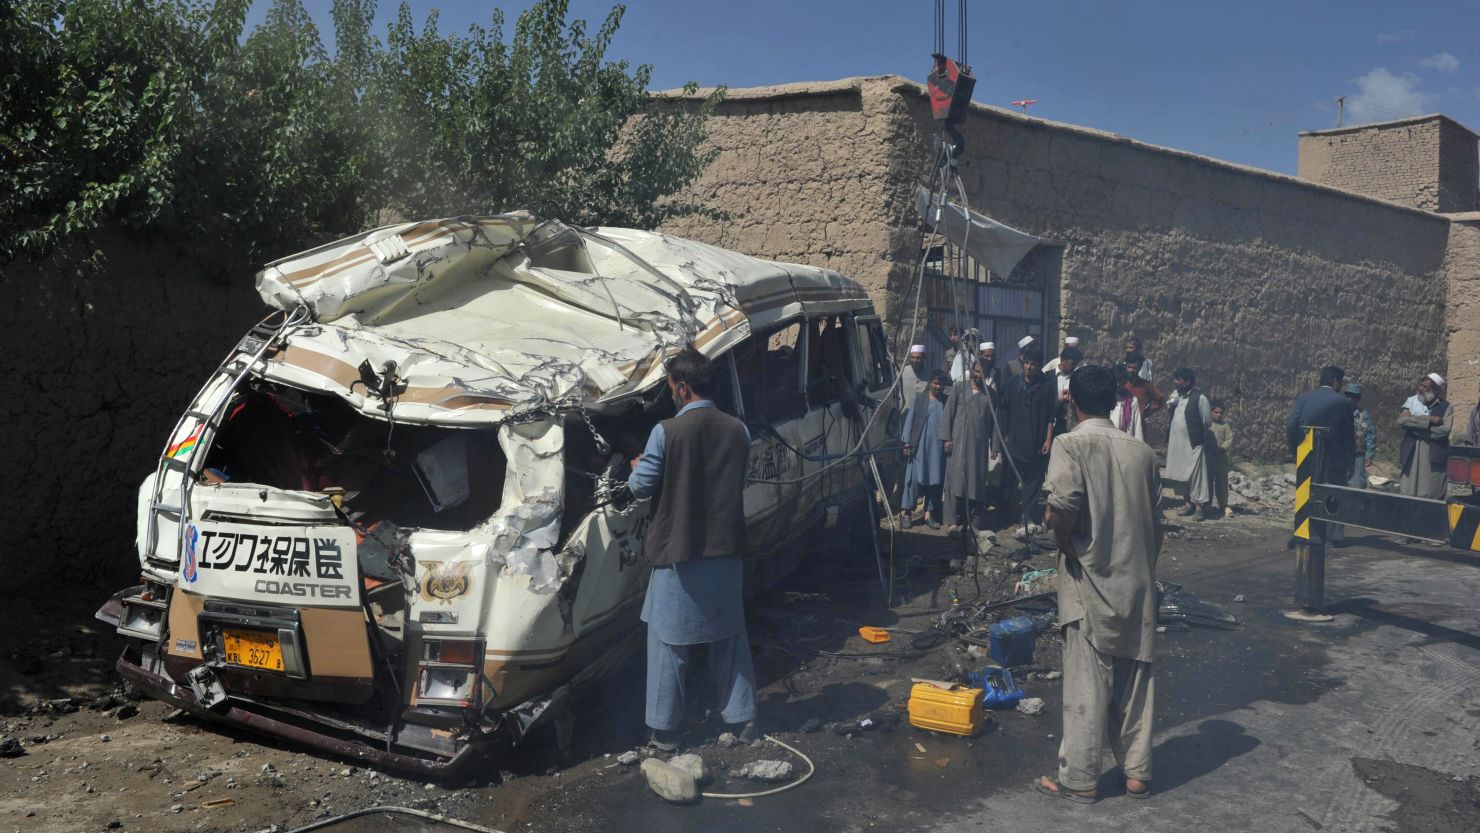 Afghan policemen and villagers at the scene where a civilian minibus was hit by a remote-controlled bomb in Paghman district of Kabul on August 7, 2012. 